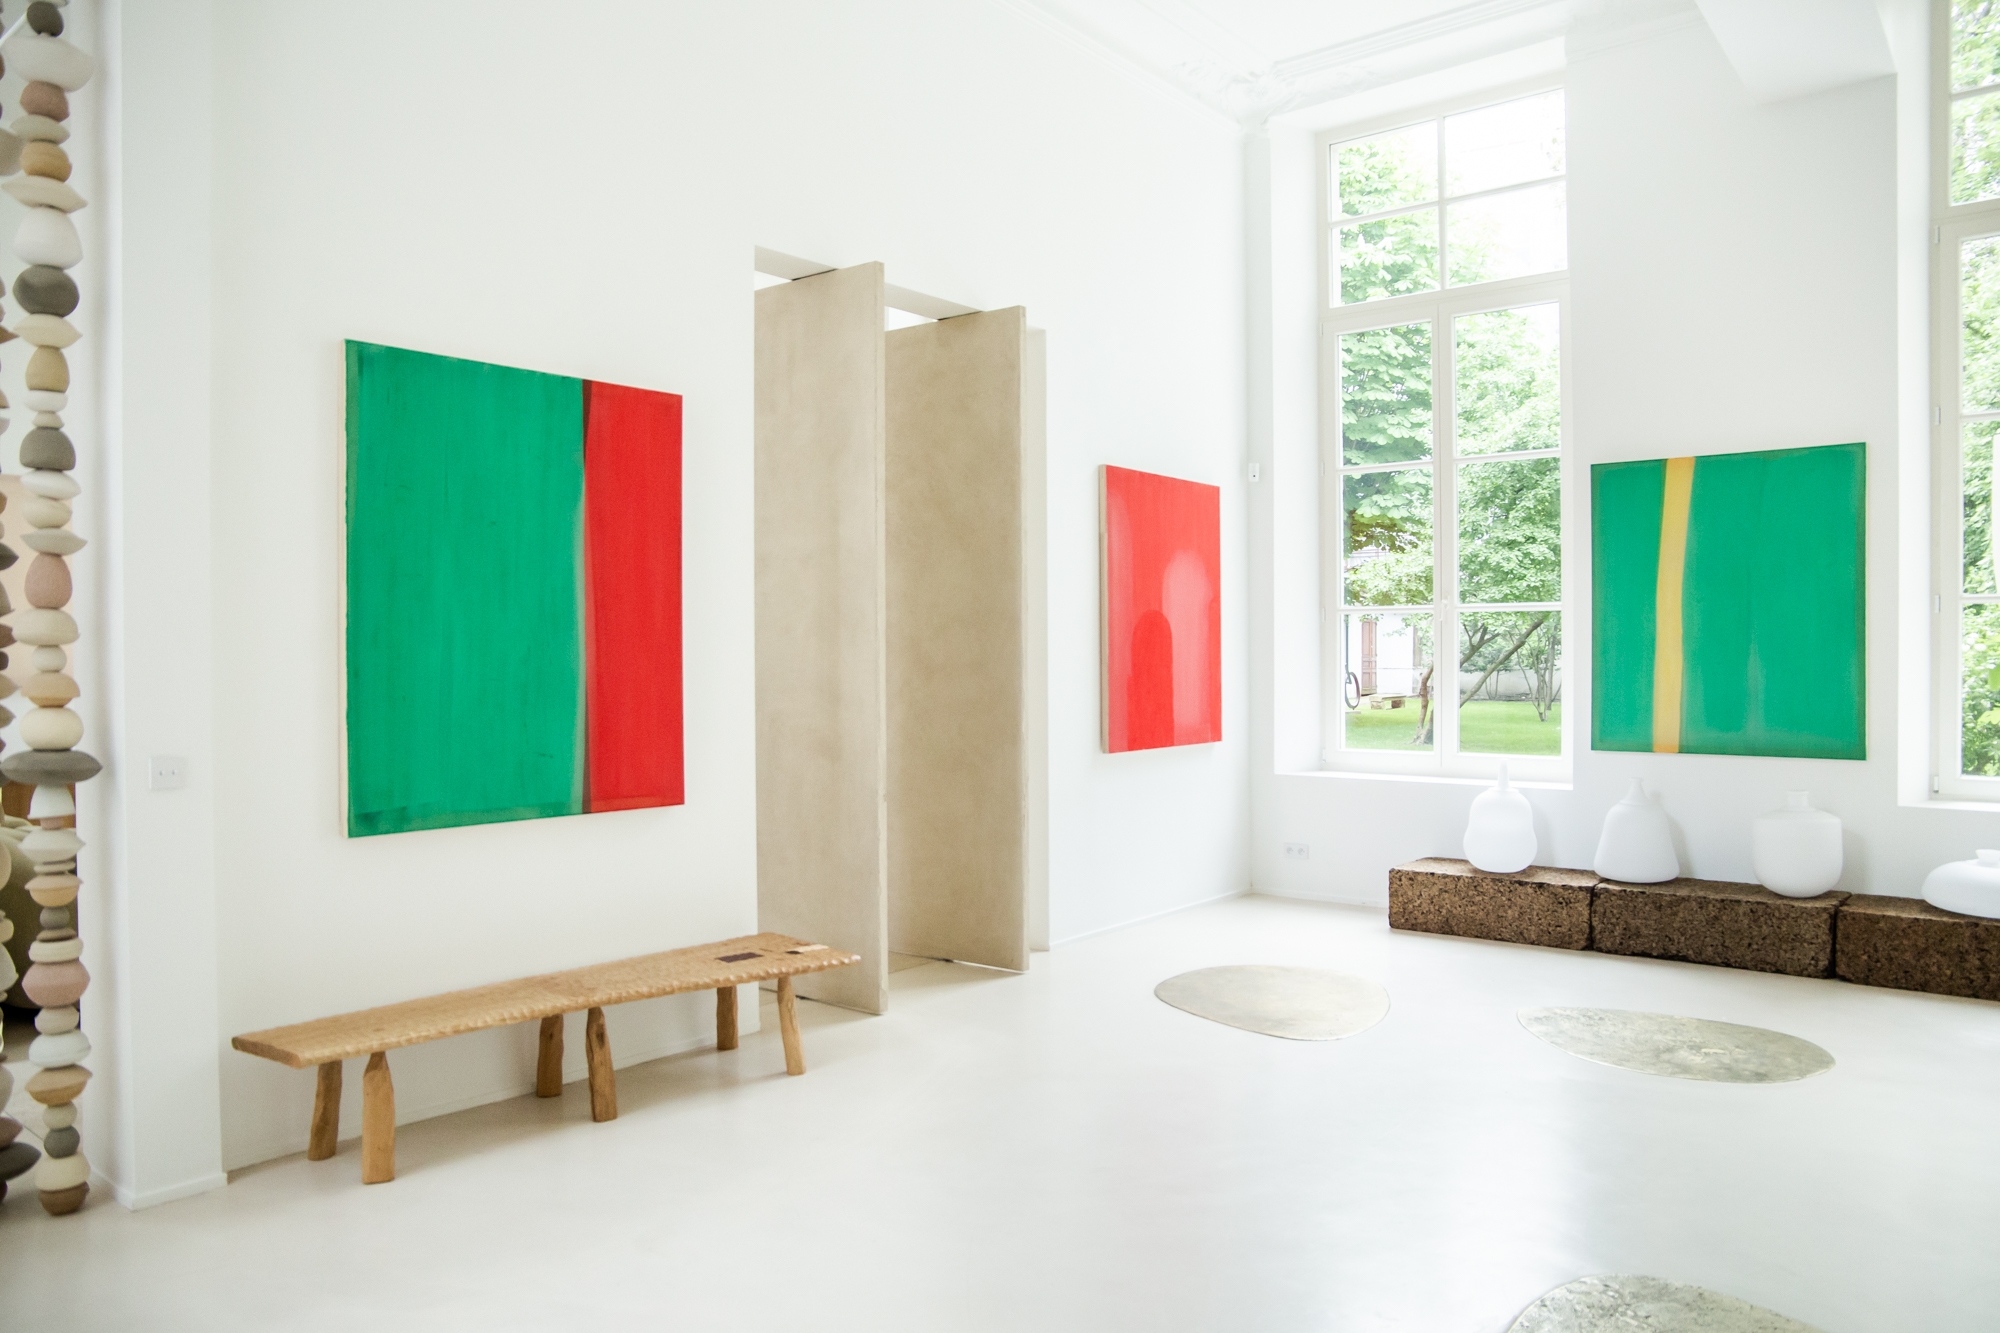 Vertical composition of Green - Red